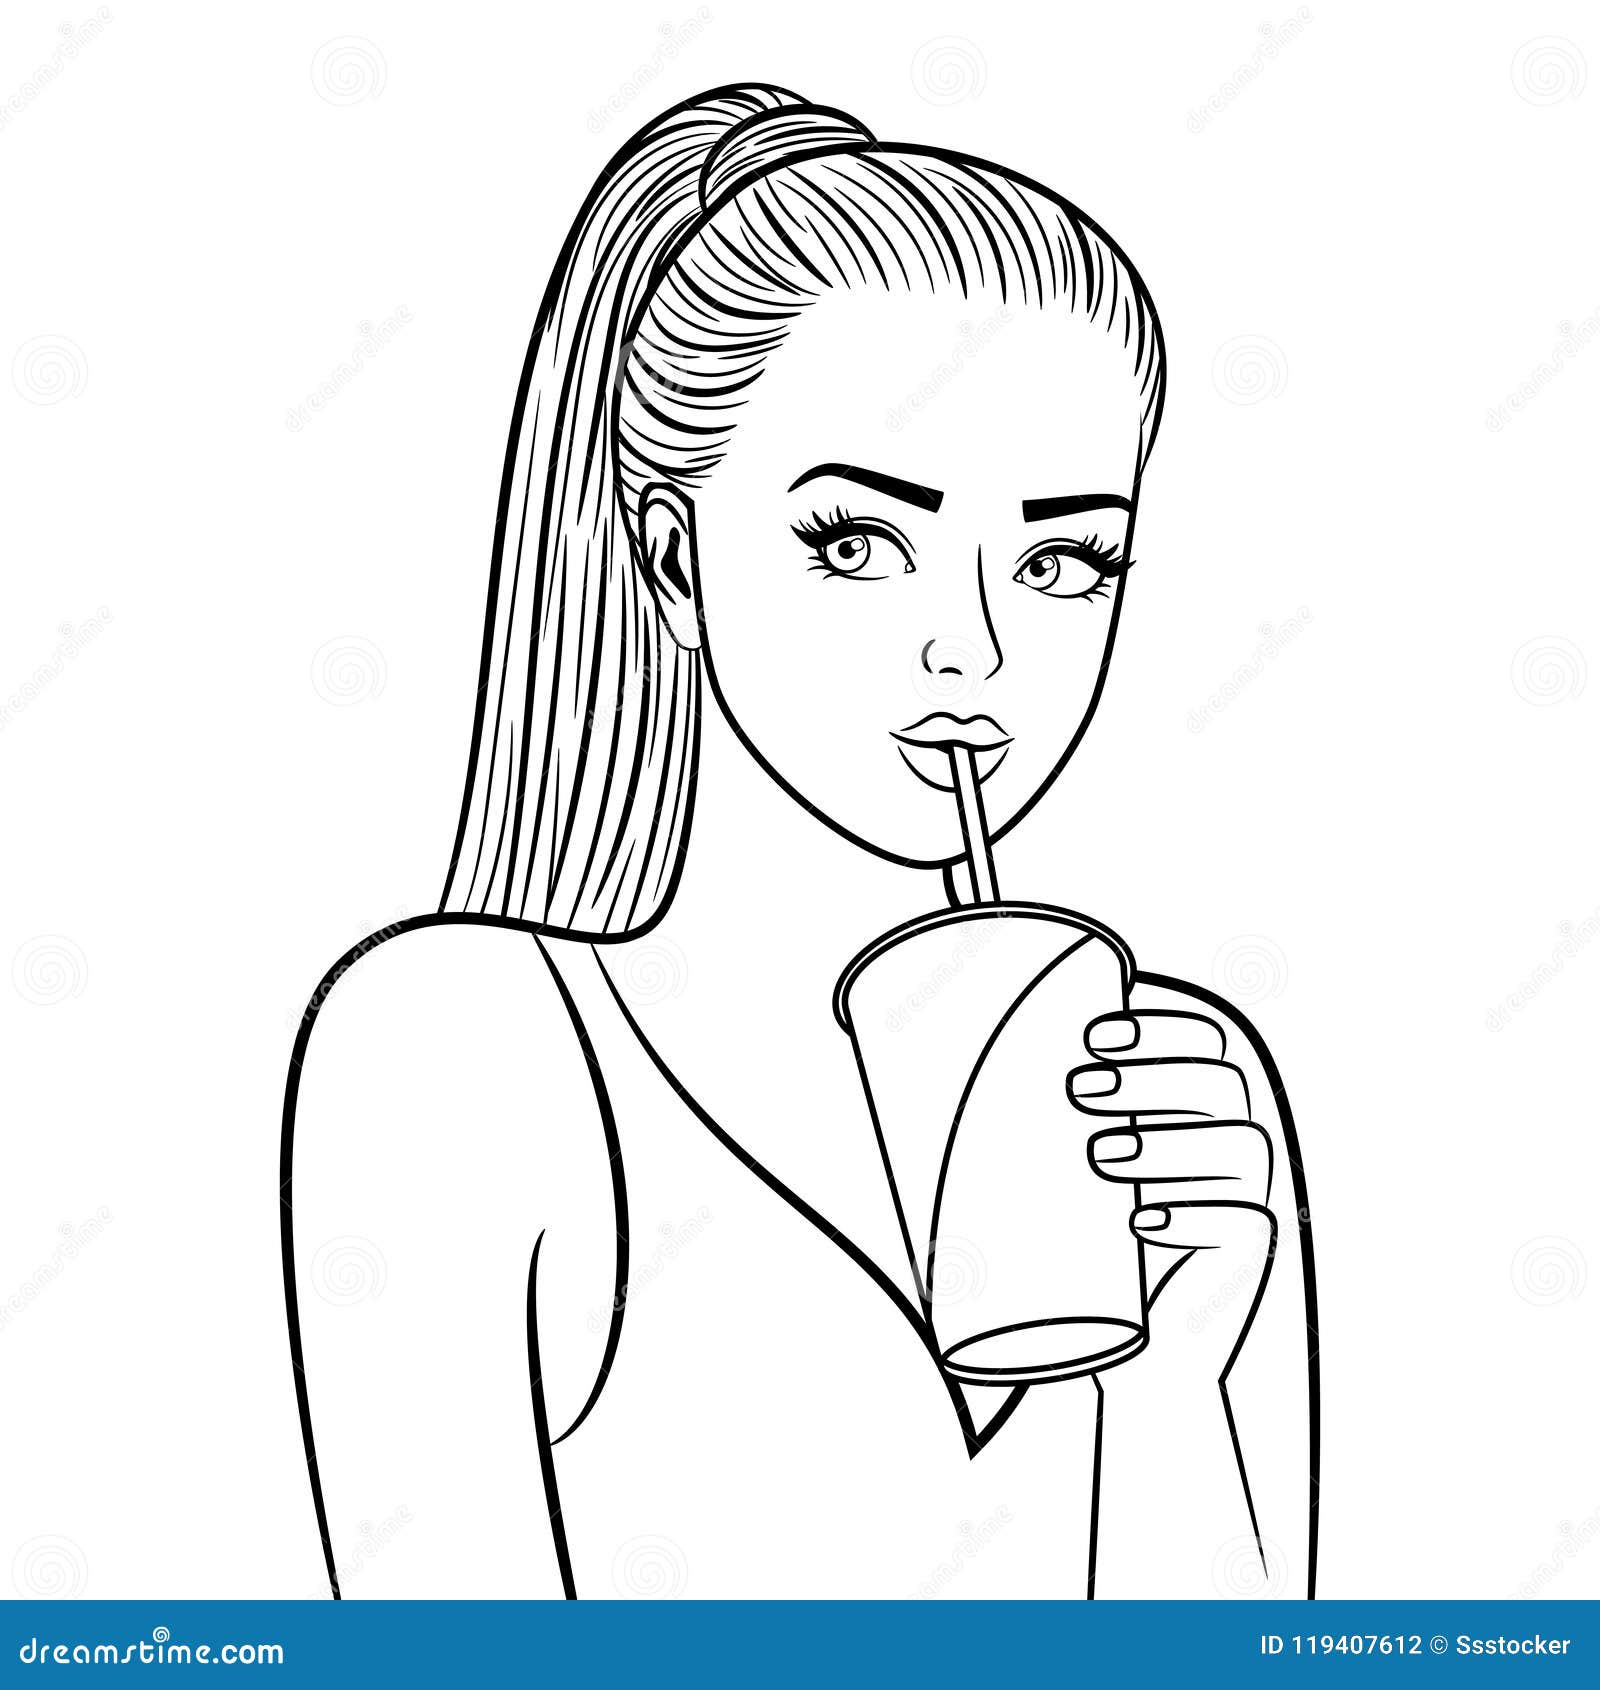 Girl with Paper Cup Coloring Page Stock Vector   Illustration of ...